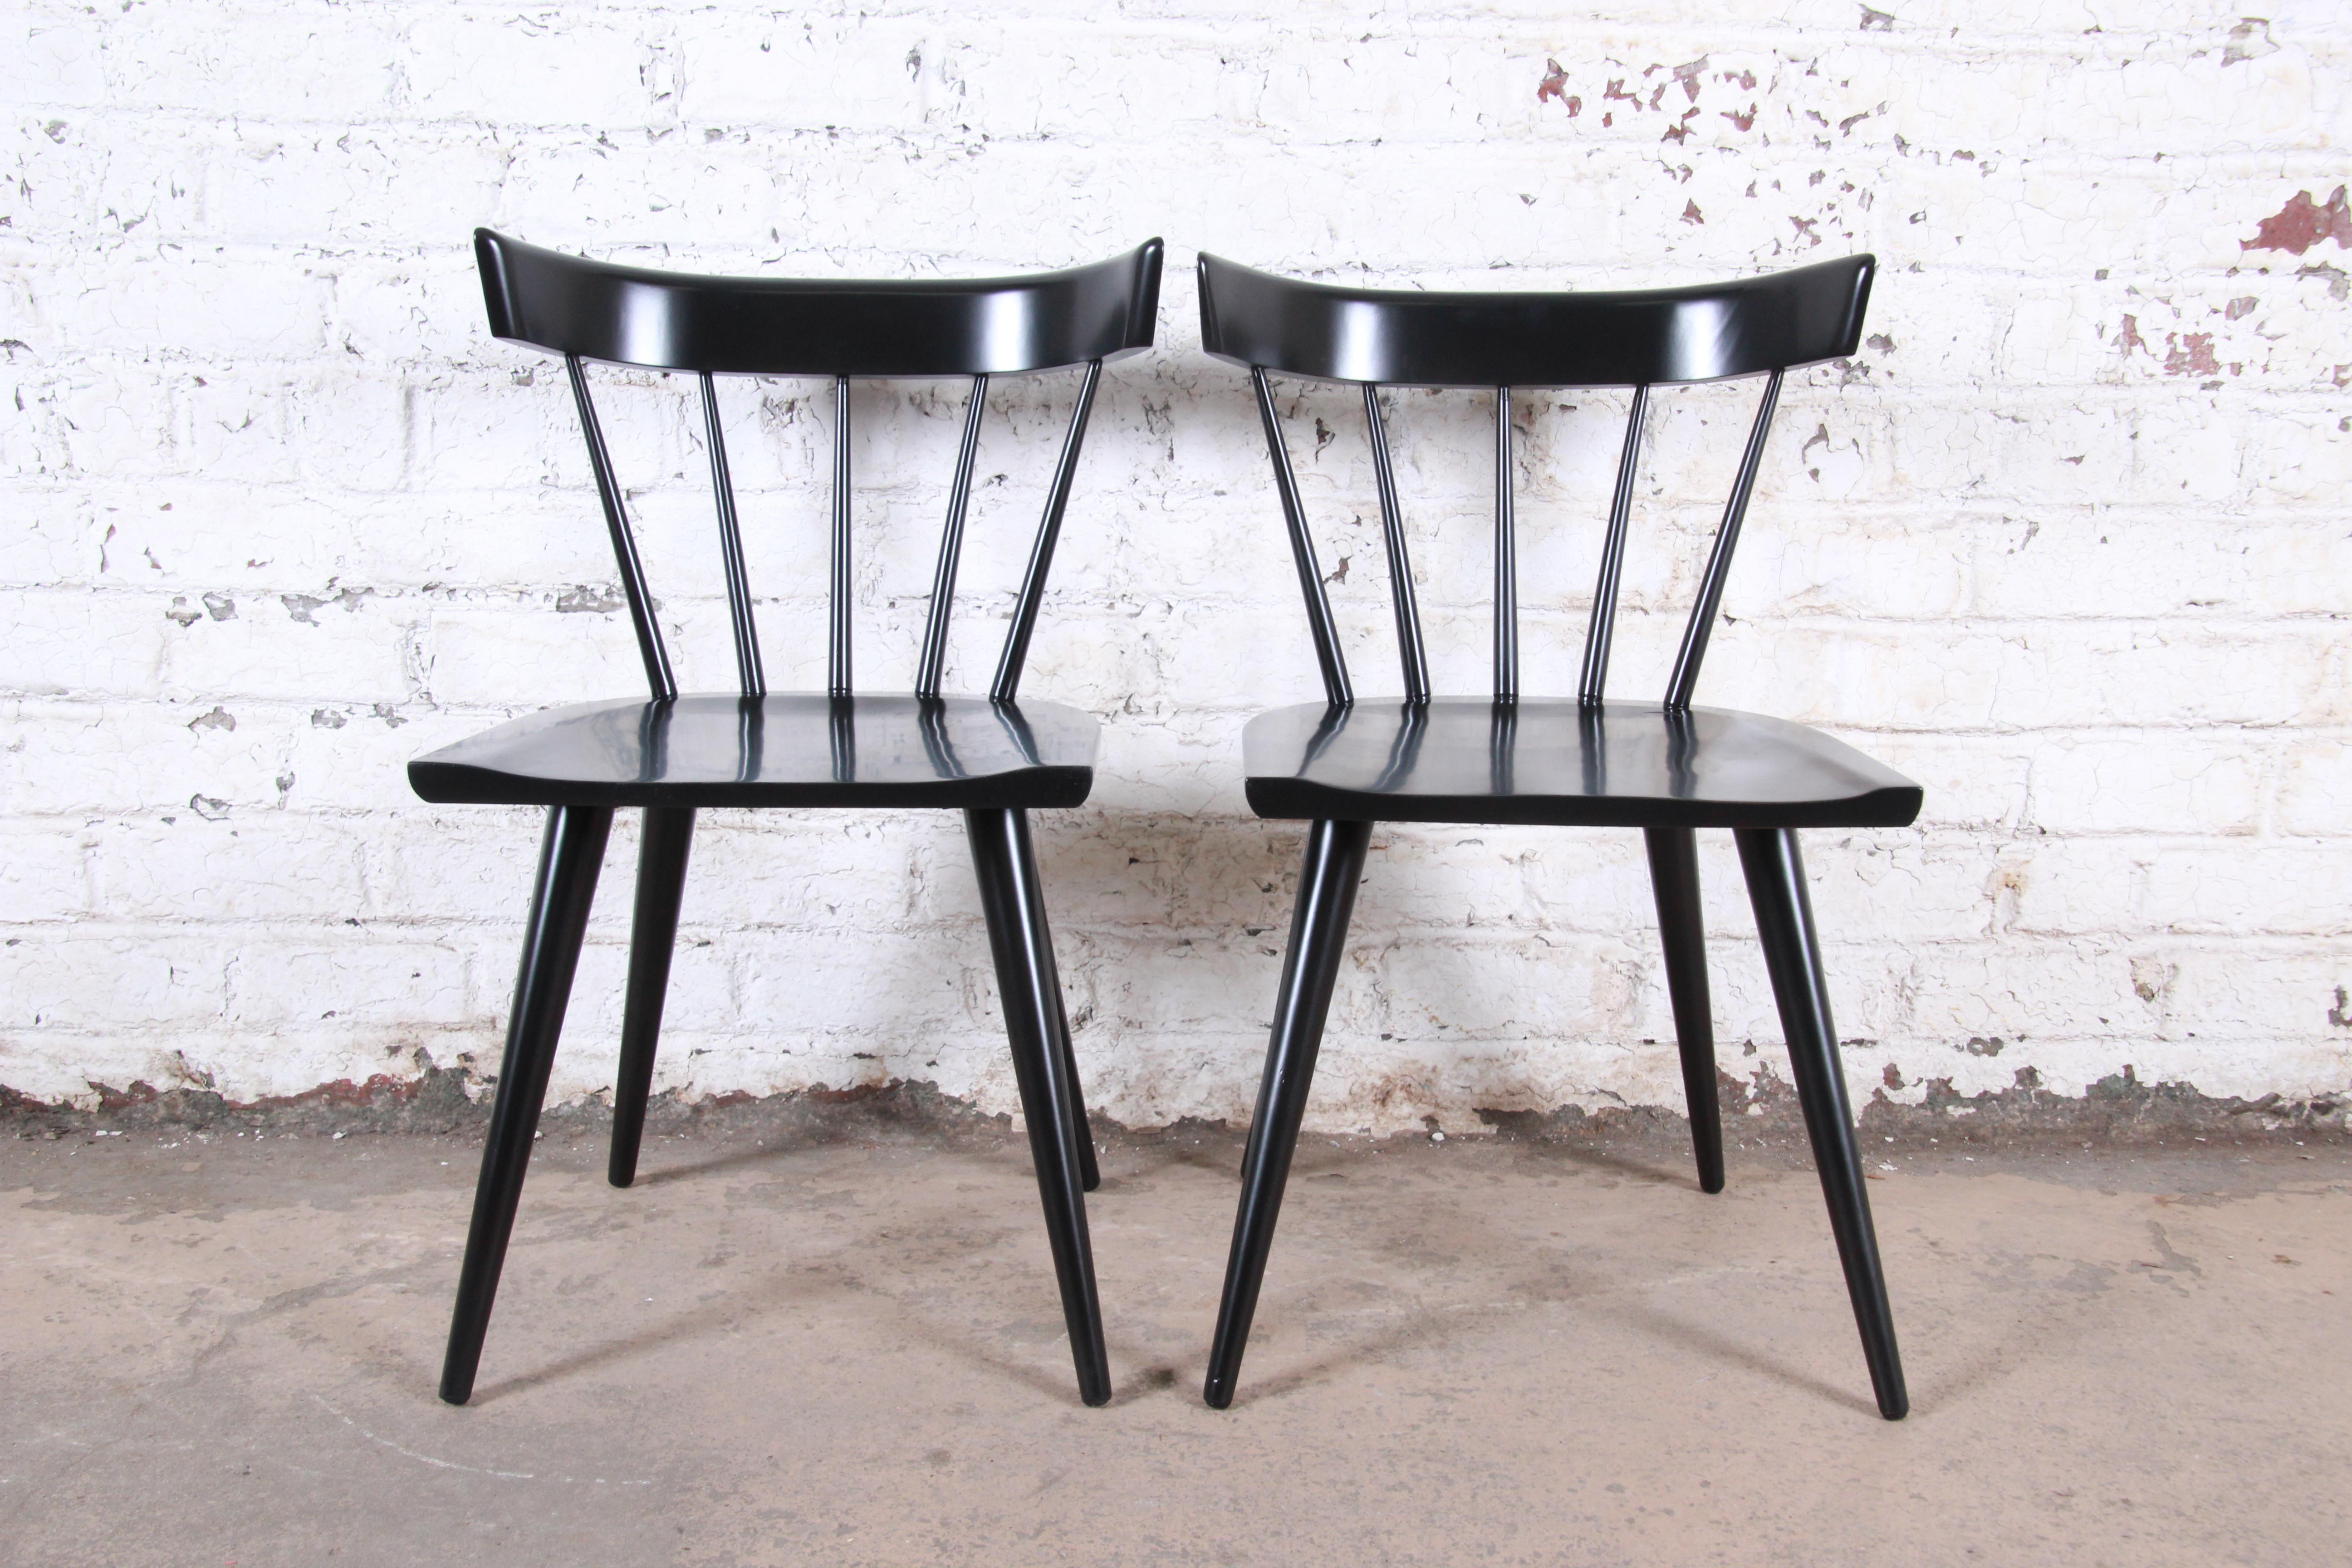 A gorgeous pair of iconic Mid-Century Modern spindle back dining chairs

Designed by Paul McCobb for Winchendon Furniture 